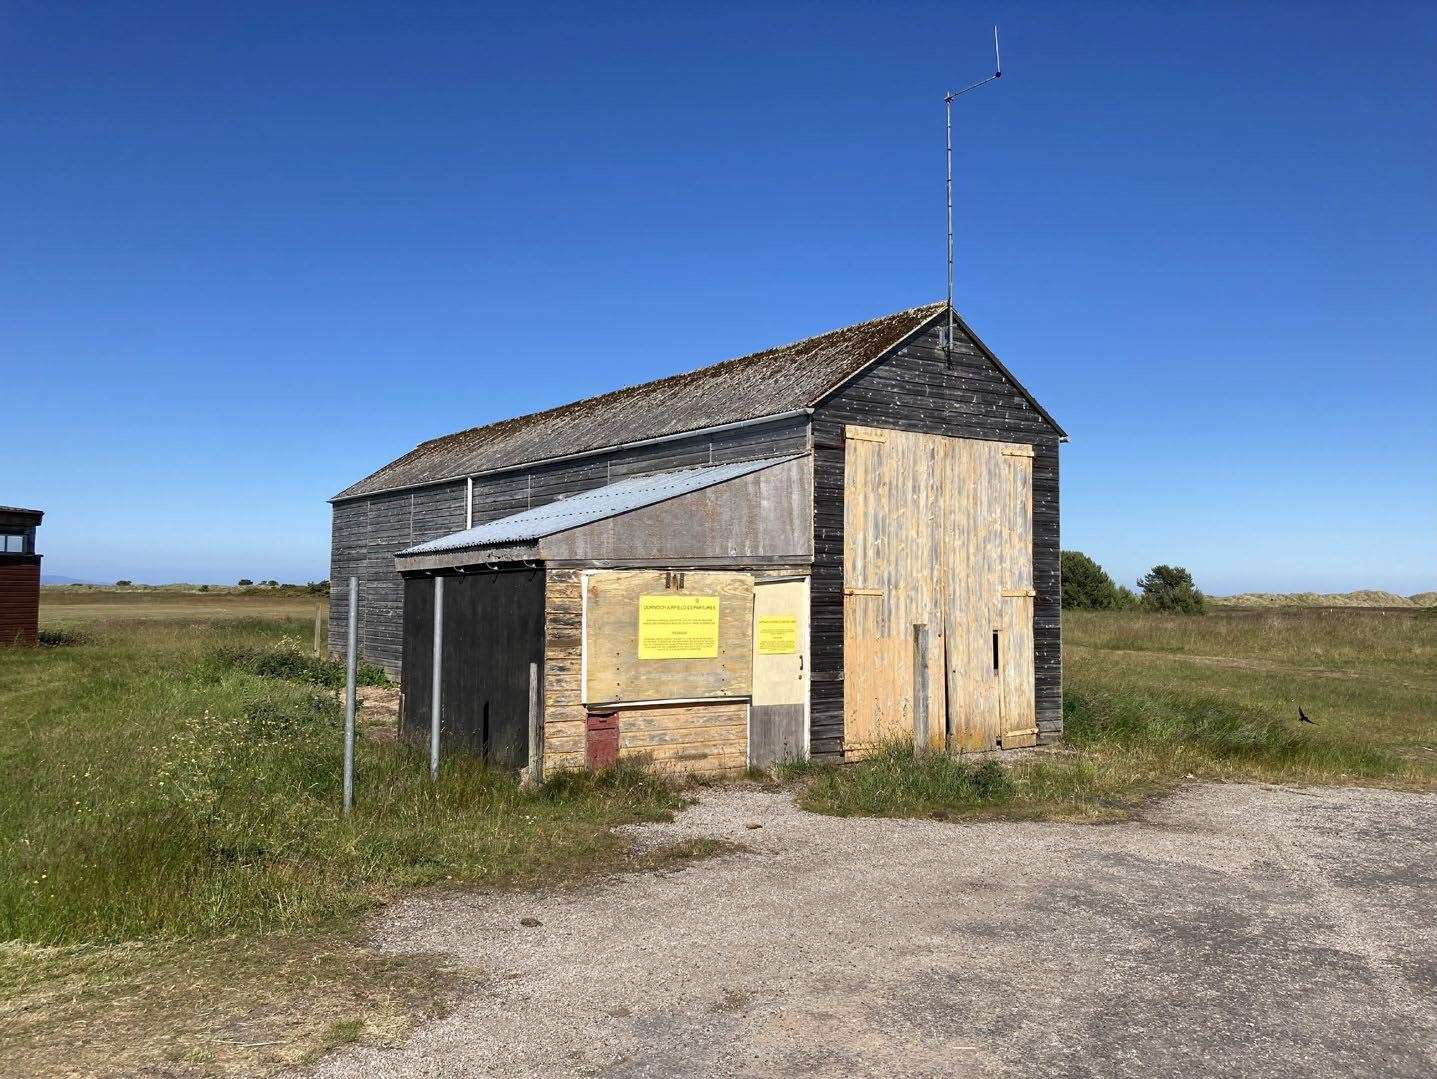 The shed at Dornoch airfield.